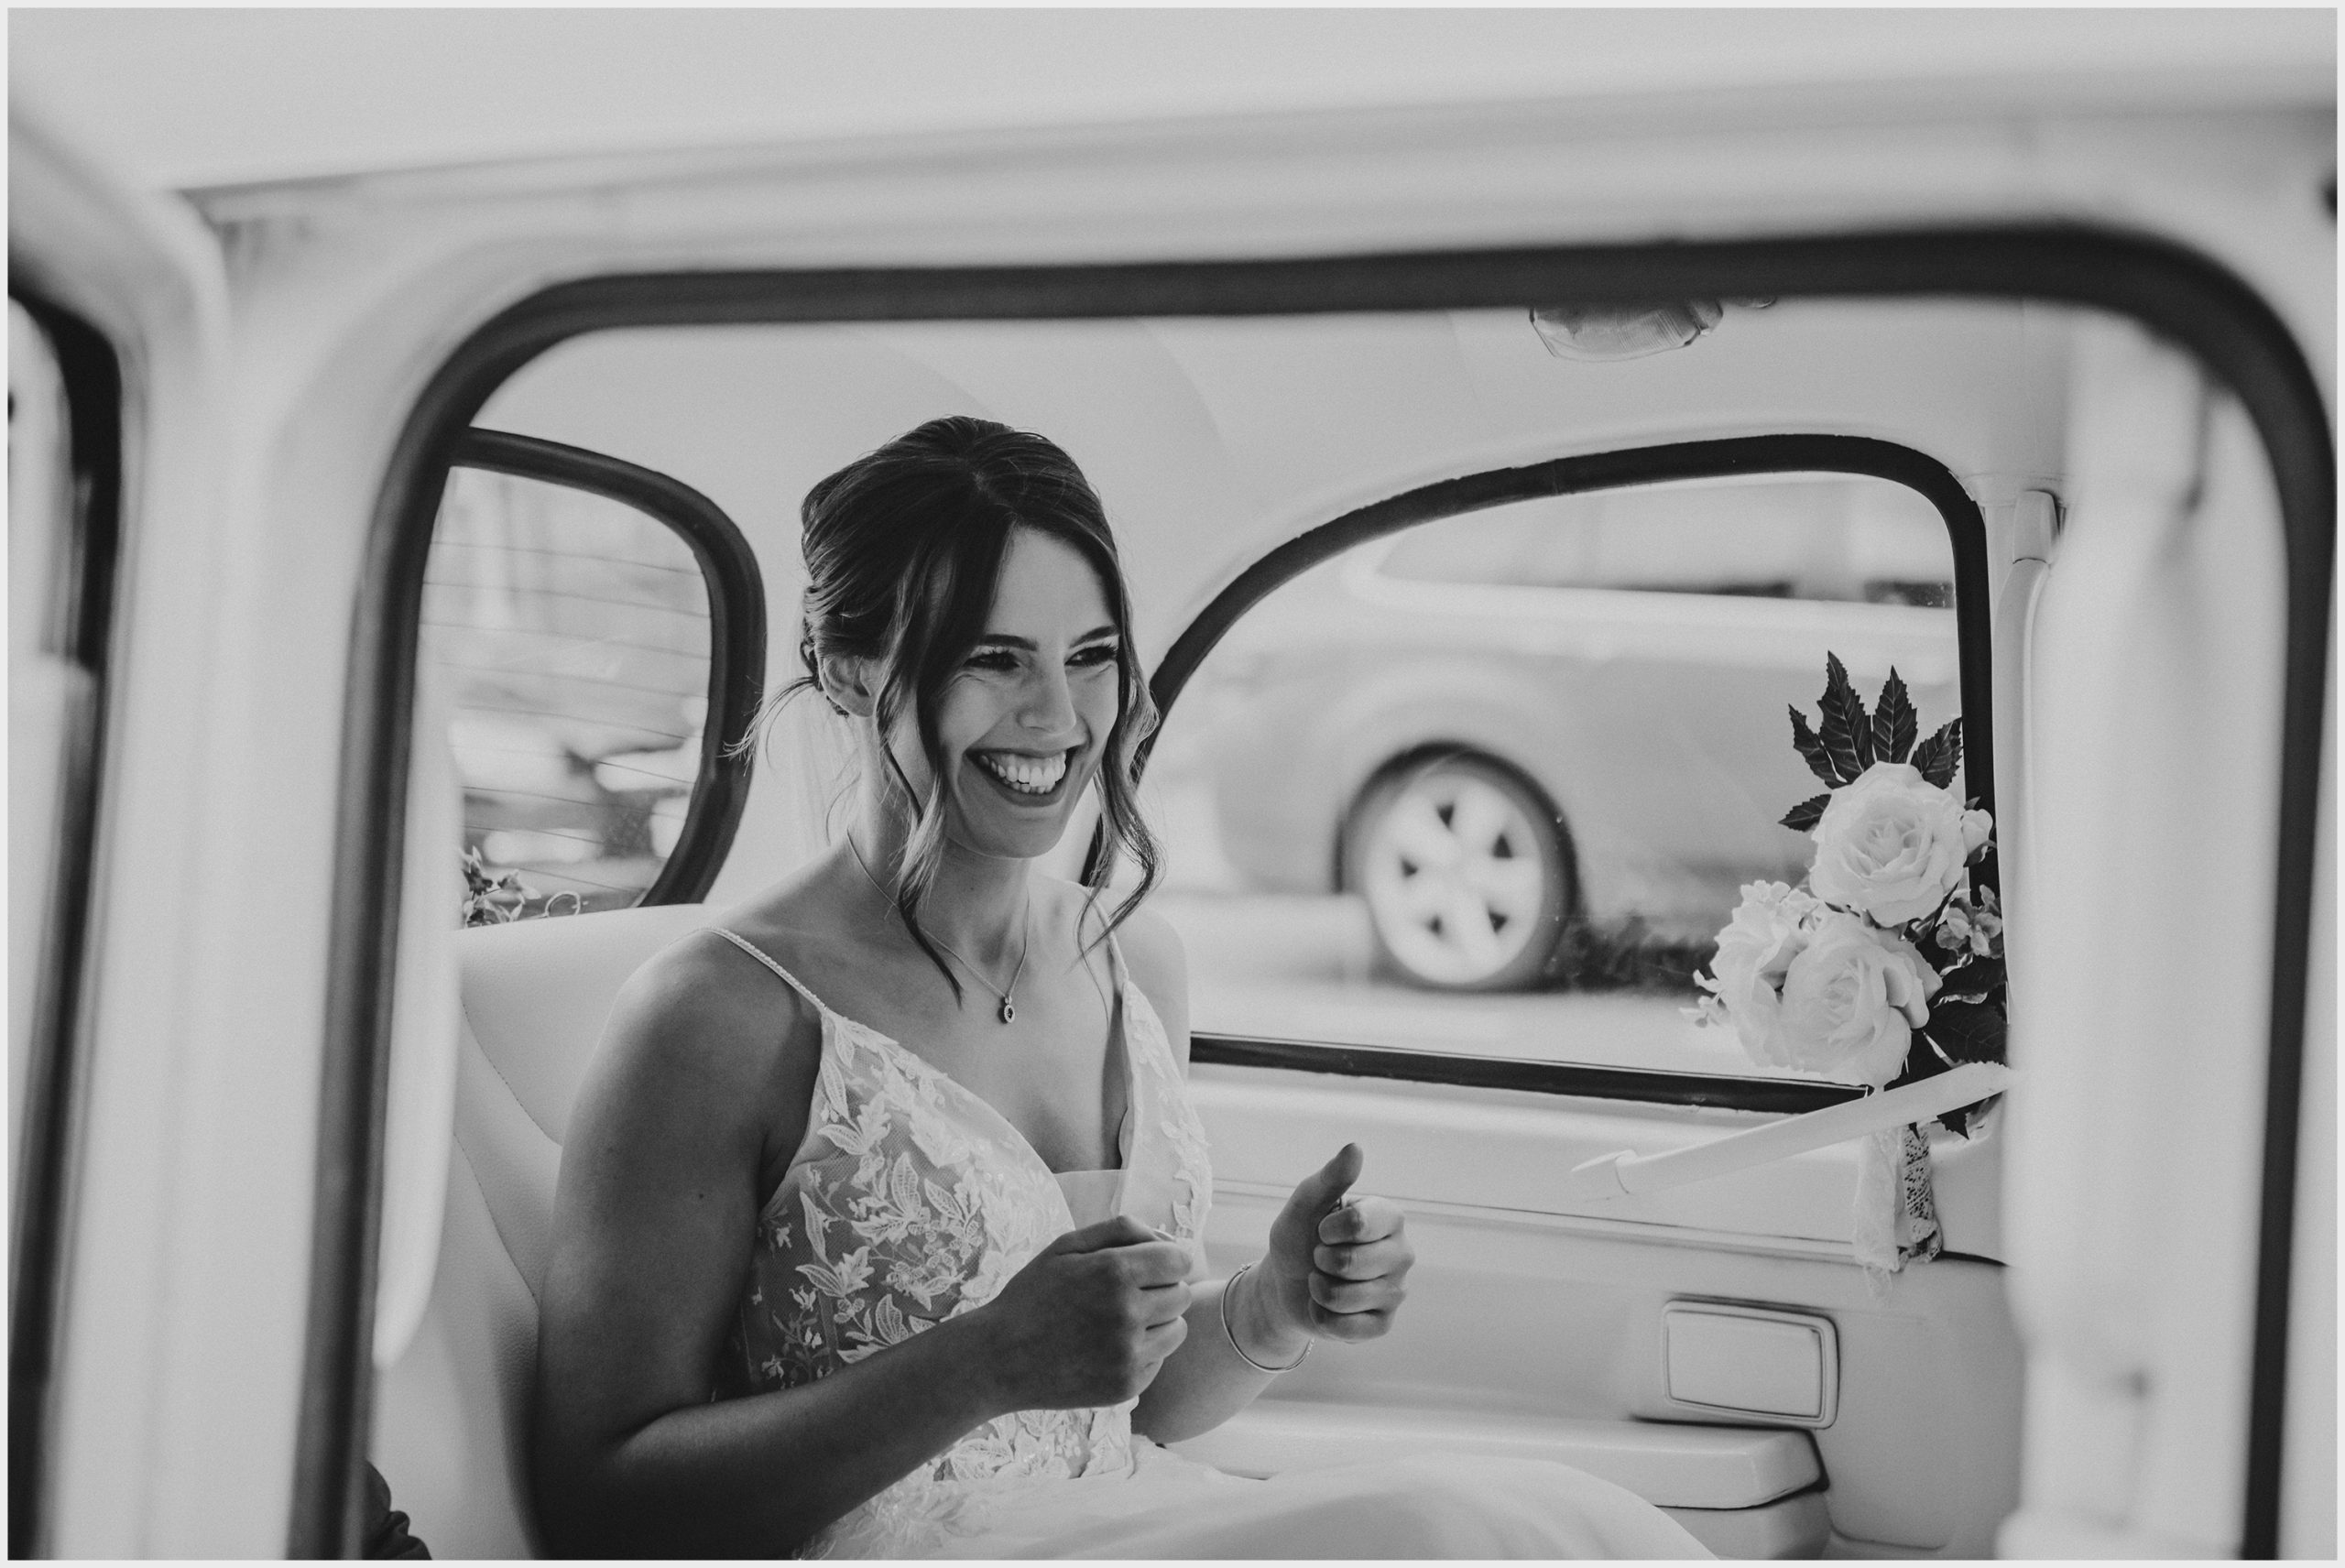 A beautiful, smiling bride sitting in the white cab that has brought her to the church to be married.  Image captured by Helena Jayne Photography Chester wedding photographer